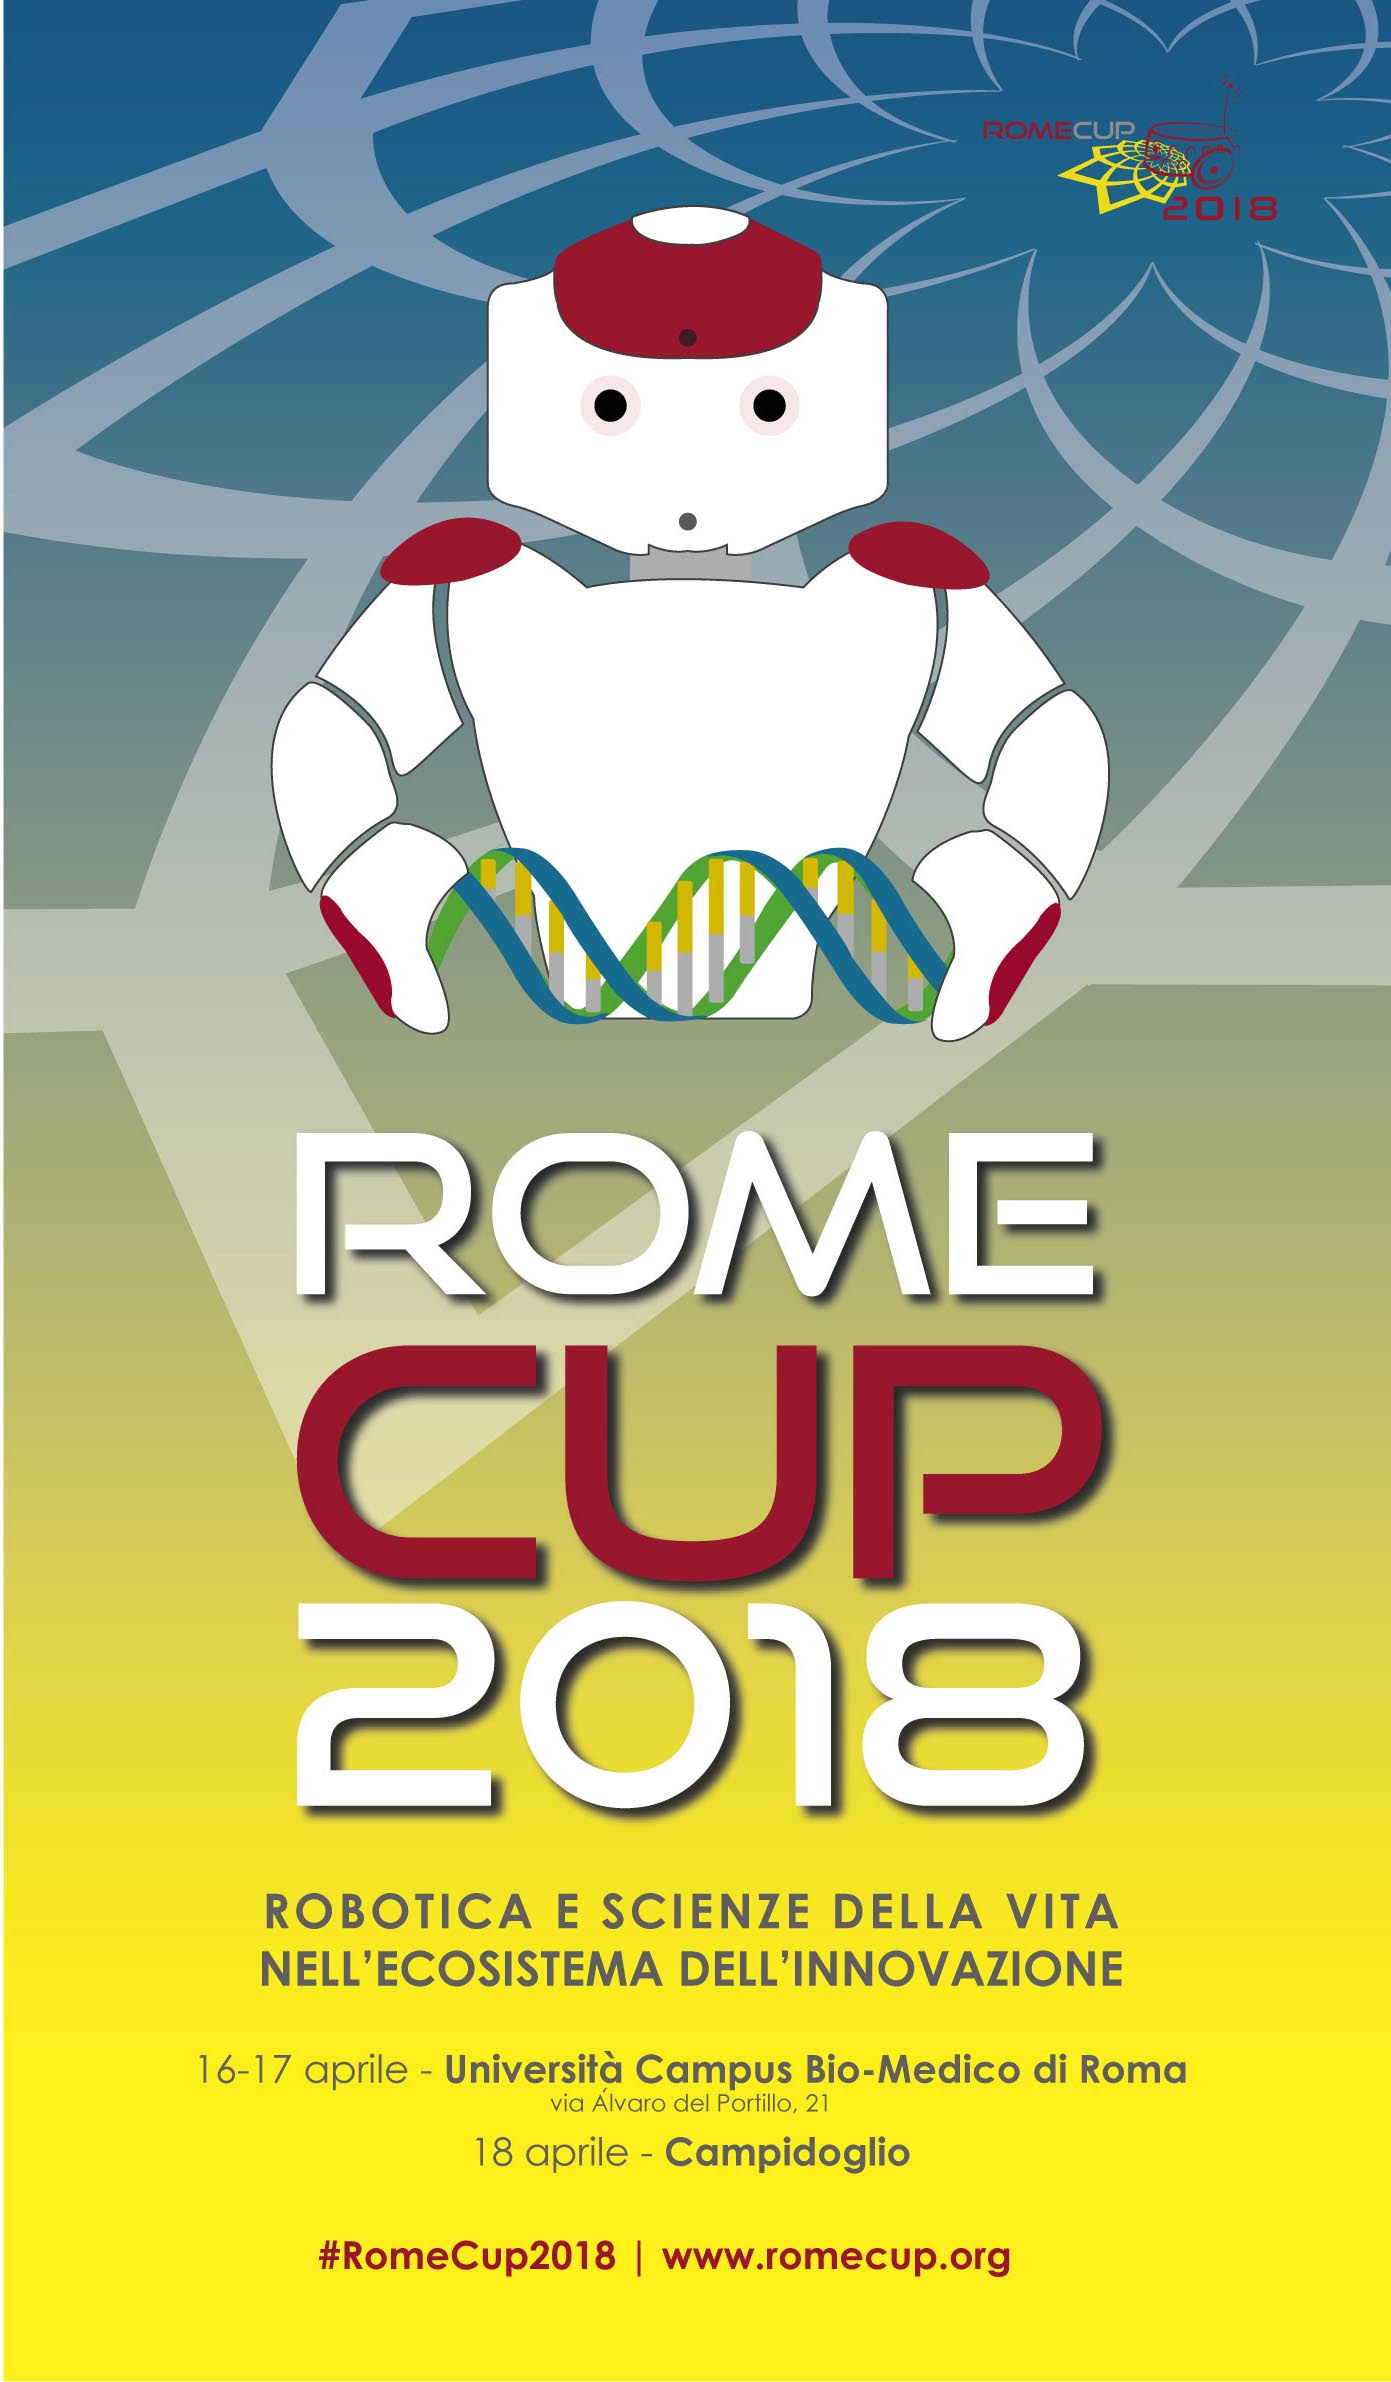 ROME CUP 2018